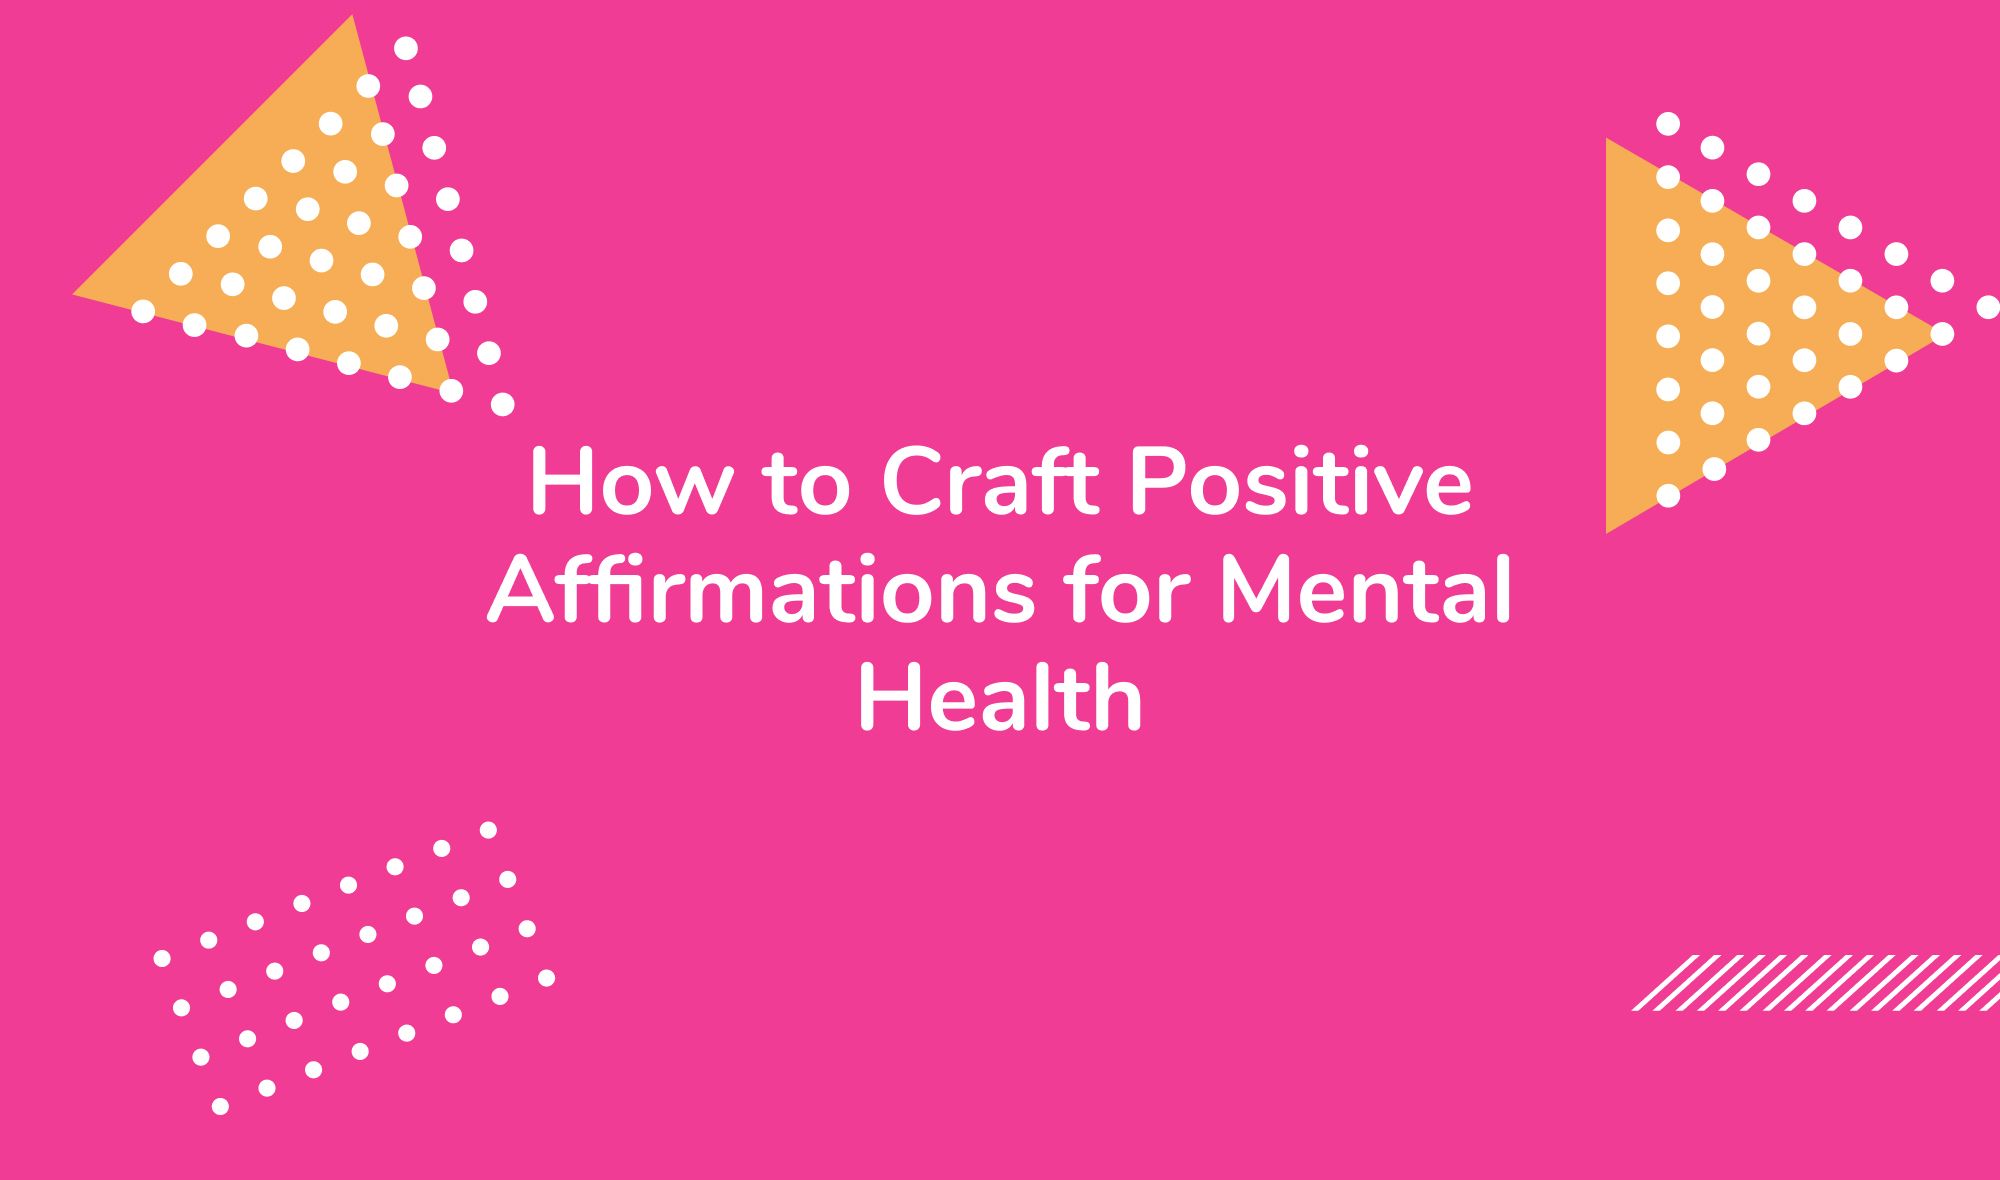 How to Craft Positive Affirmations for Mental Health